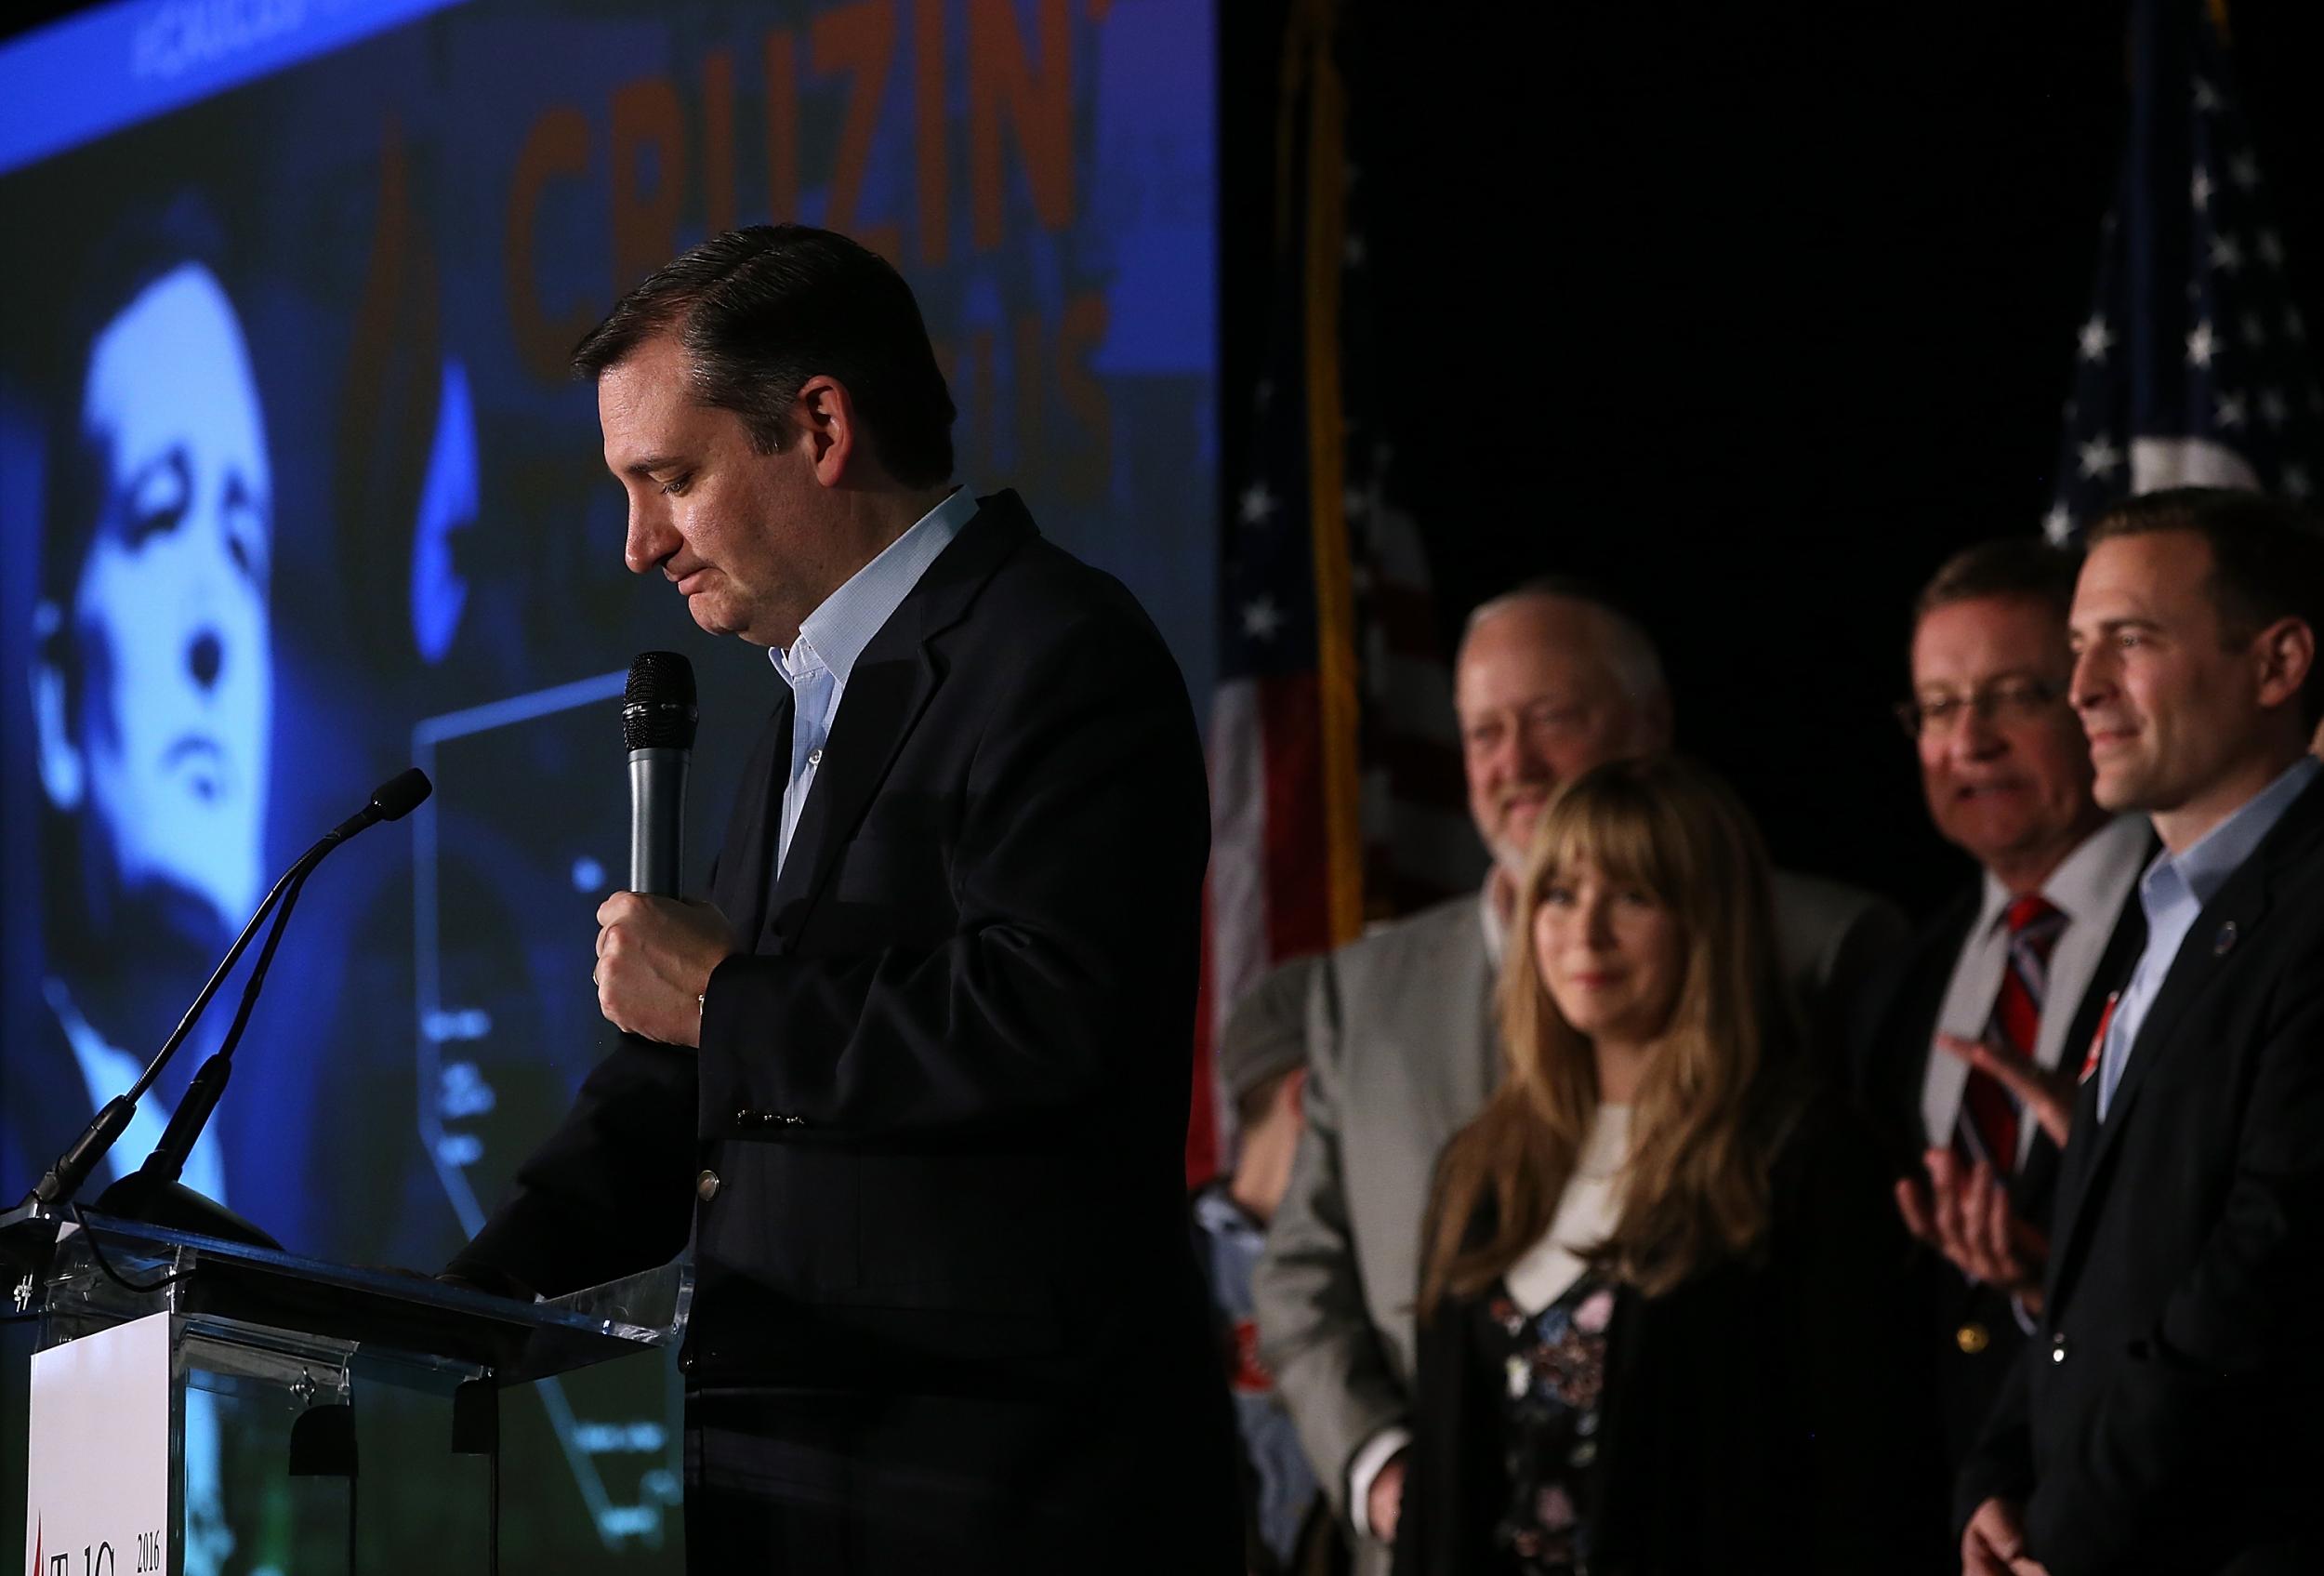 Cruz, a very conservative candidate who can't win, is crippling Rubio's hopes of beating Trump.